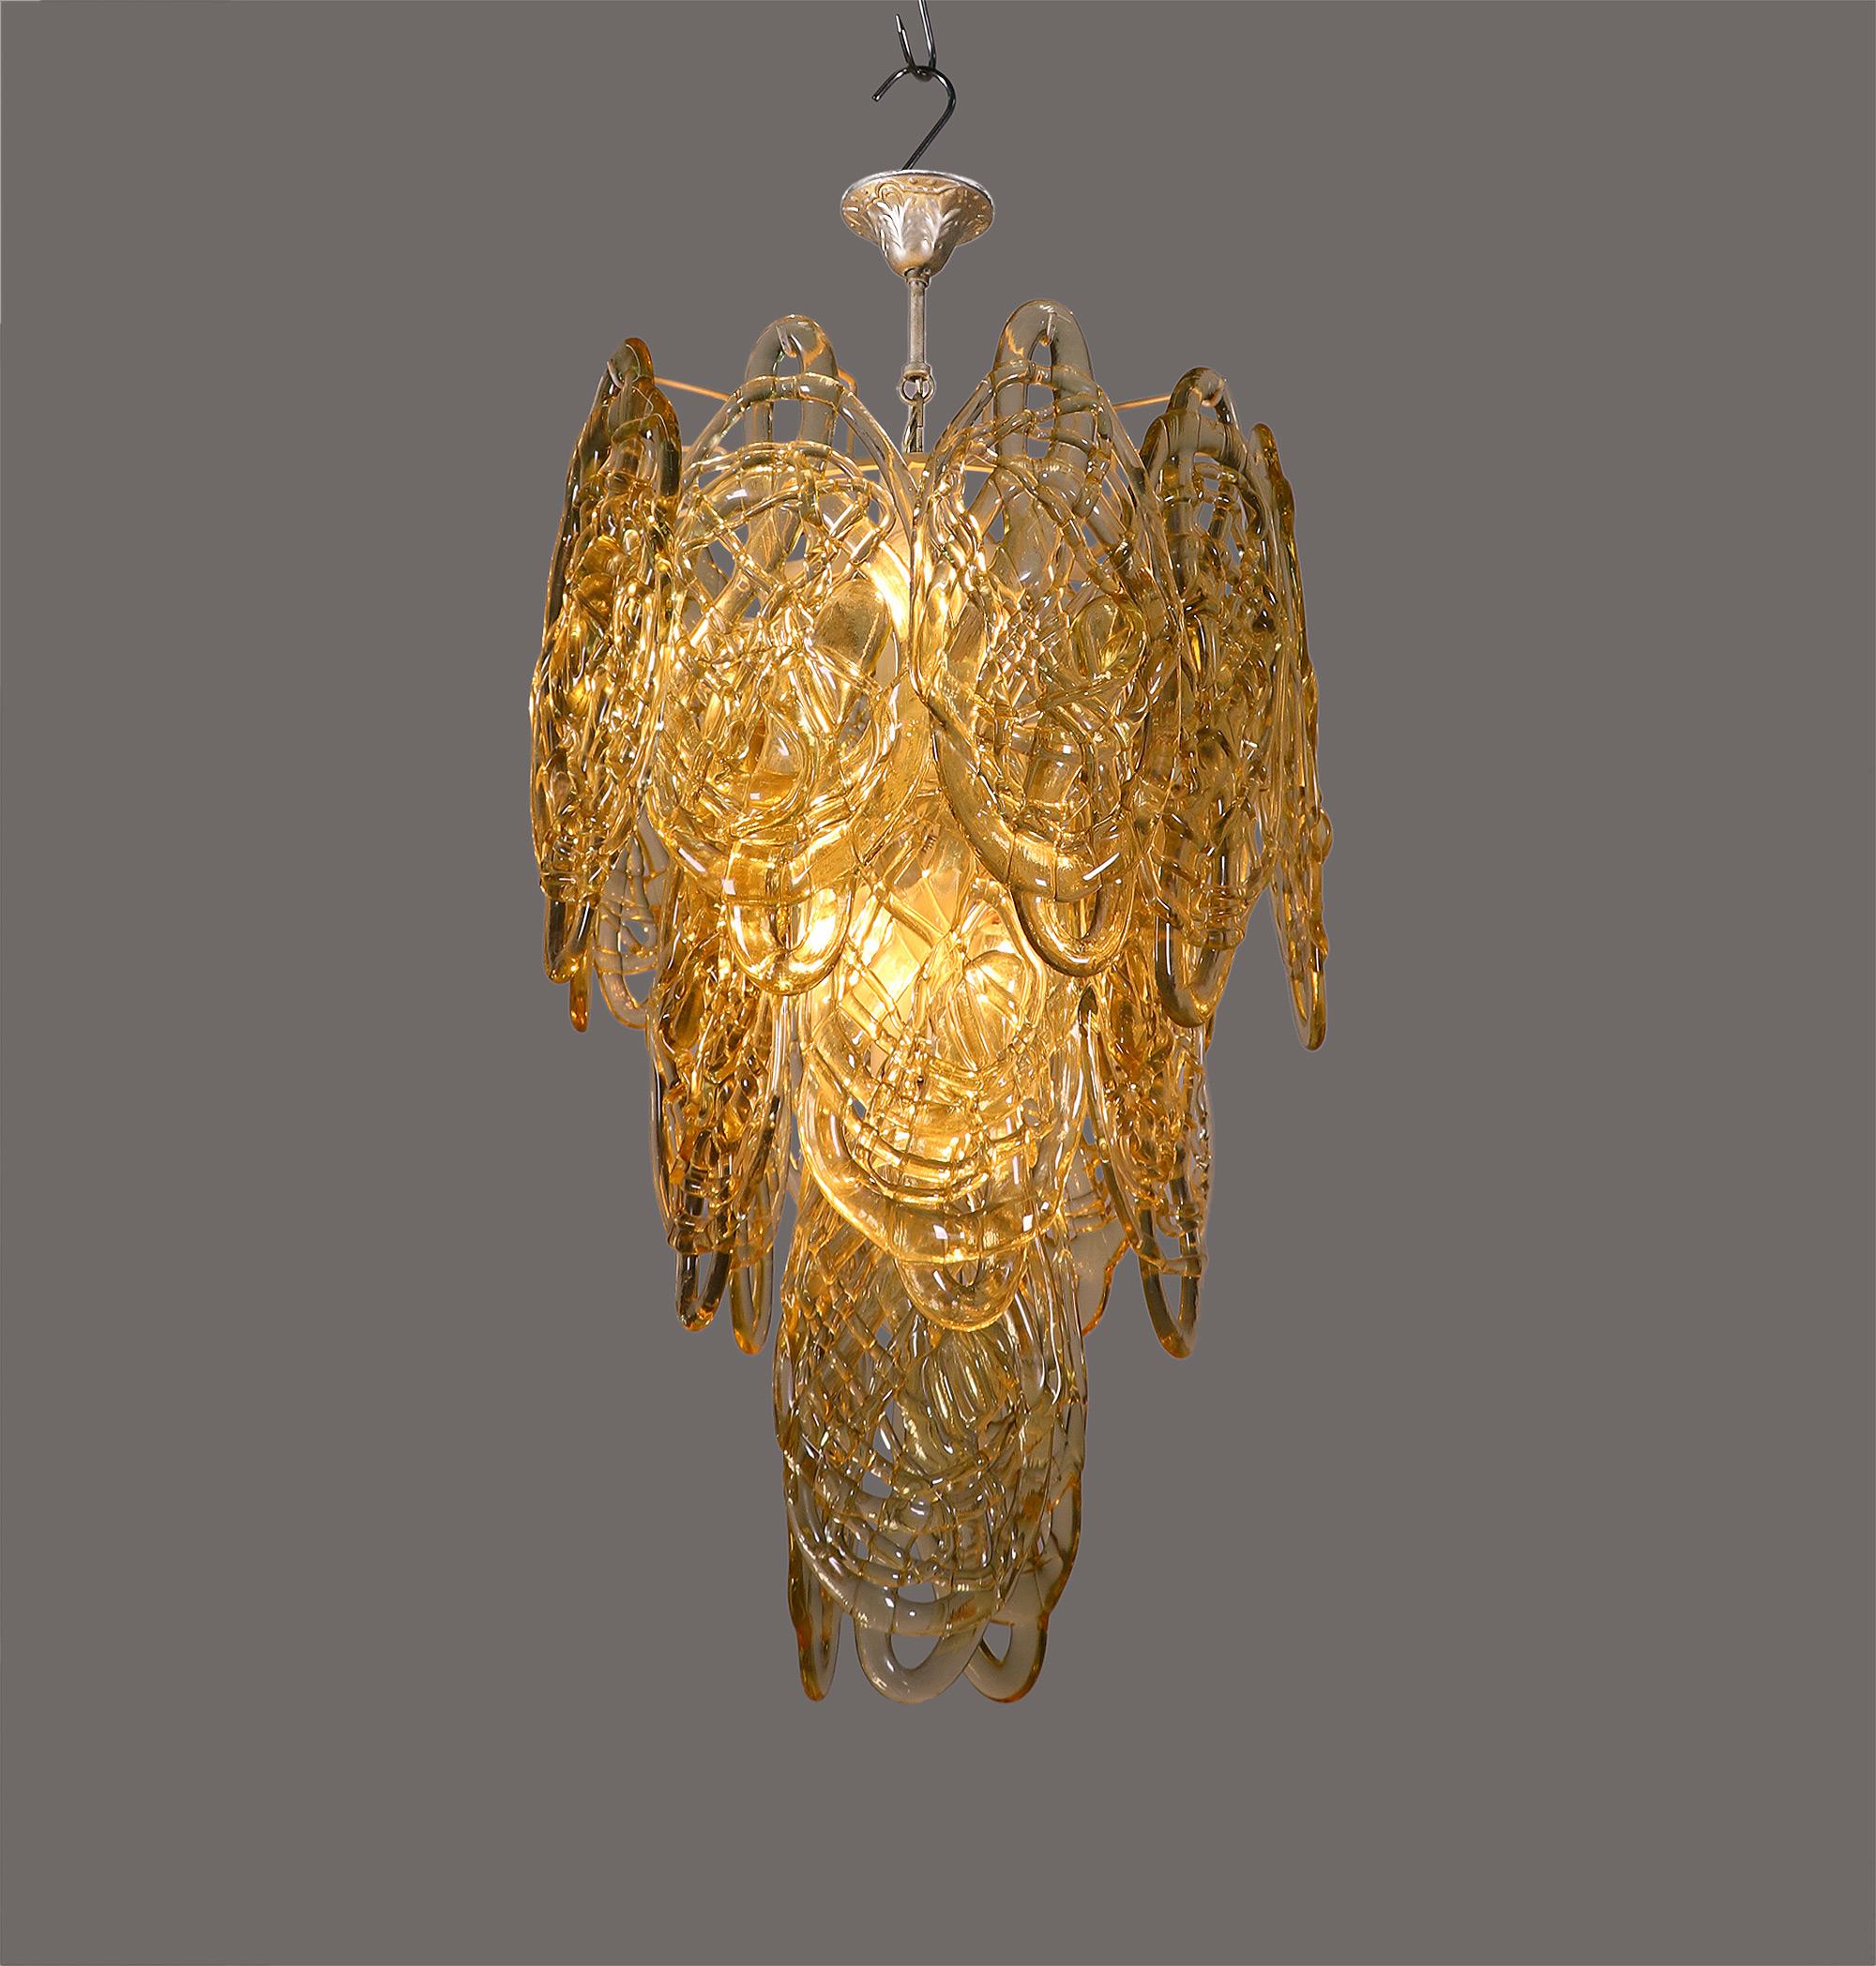 Elegant 'Spaghetti' chandelier with nineteen large mouth-blown, amber-colored wired glass panels on a white metal frame. Early execution. Lamp sockets are made from ceramics and metal. The white frame got at several points after-lacquered.